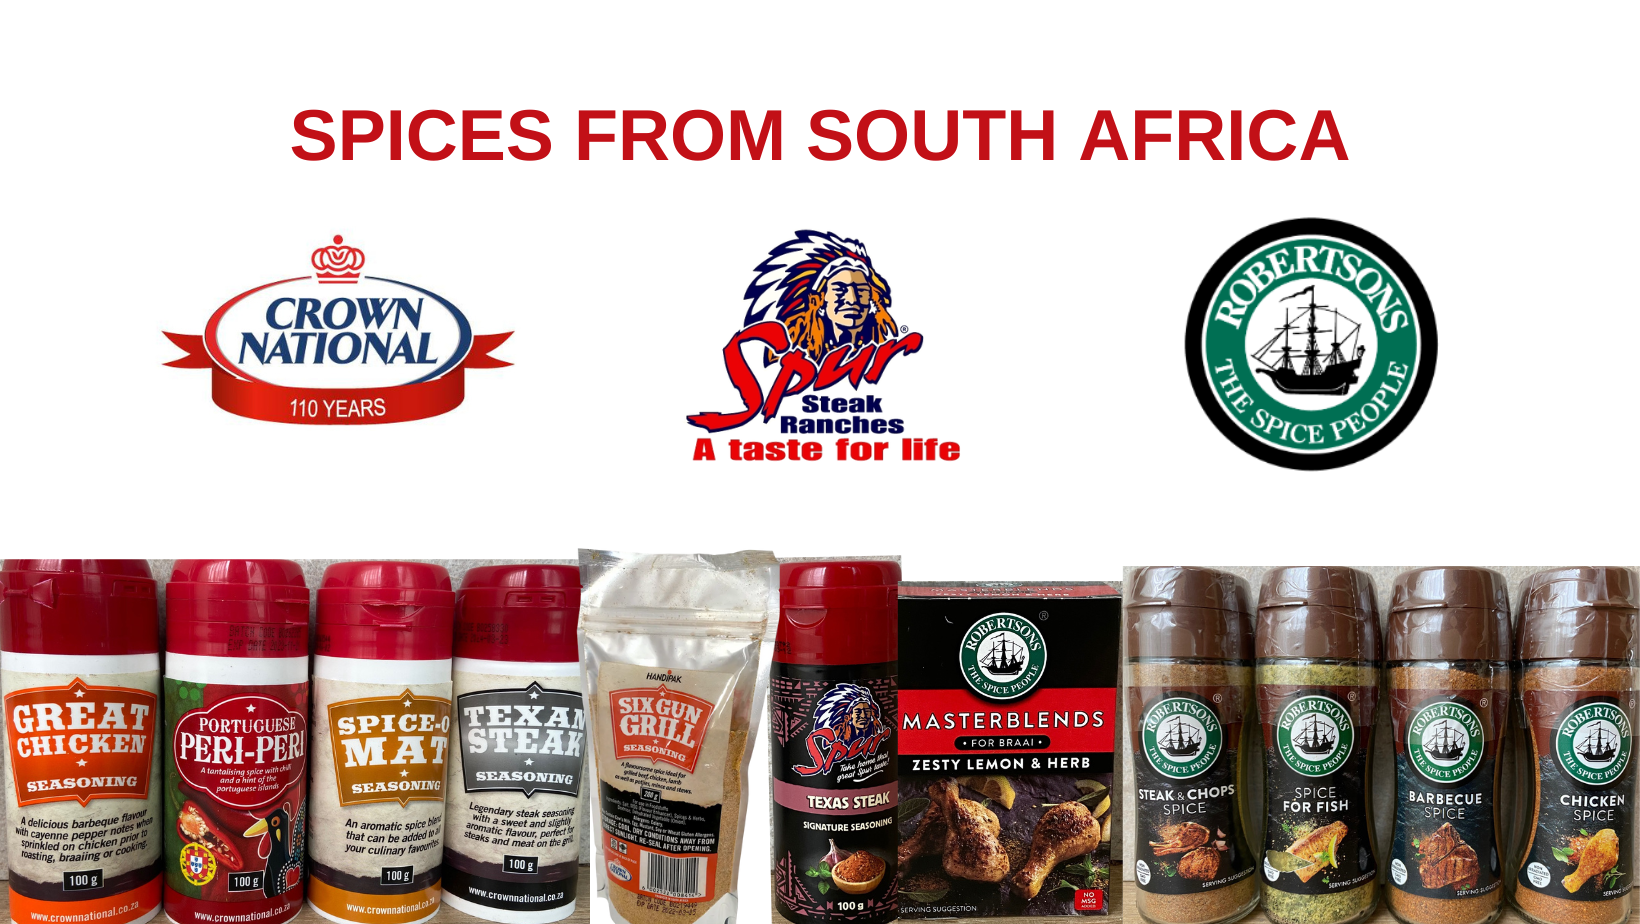 SPICE FROM SOUTH AFRICA